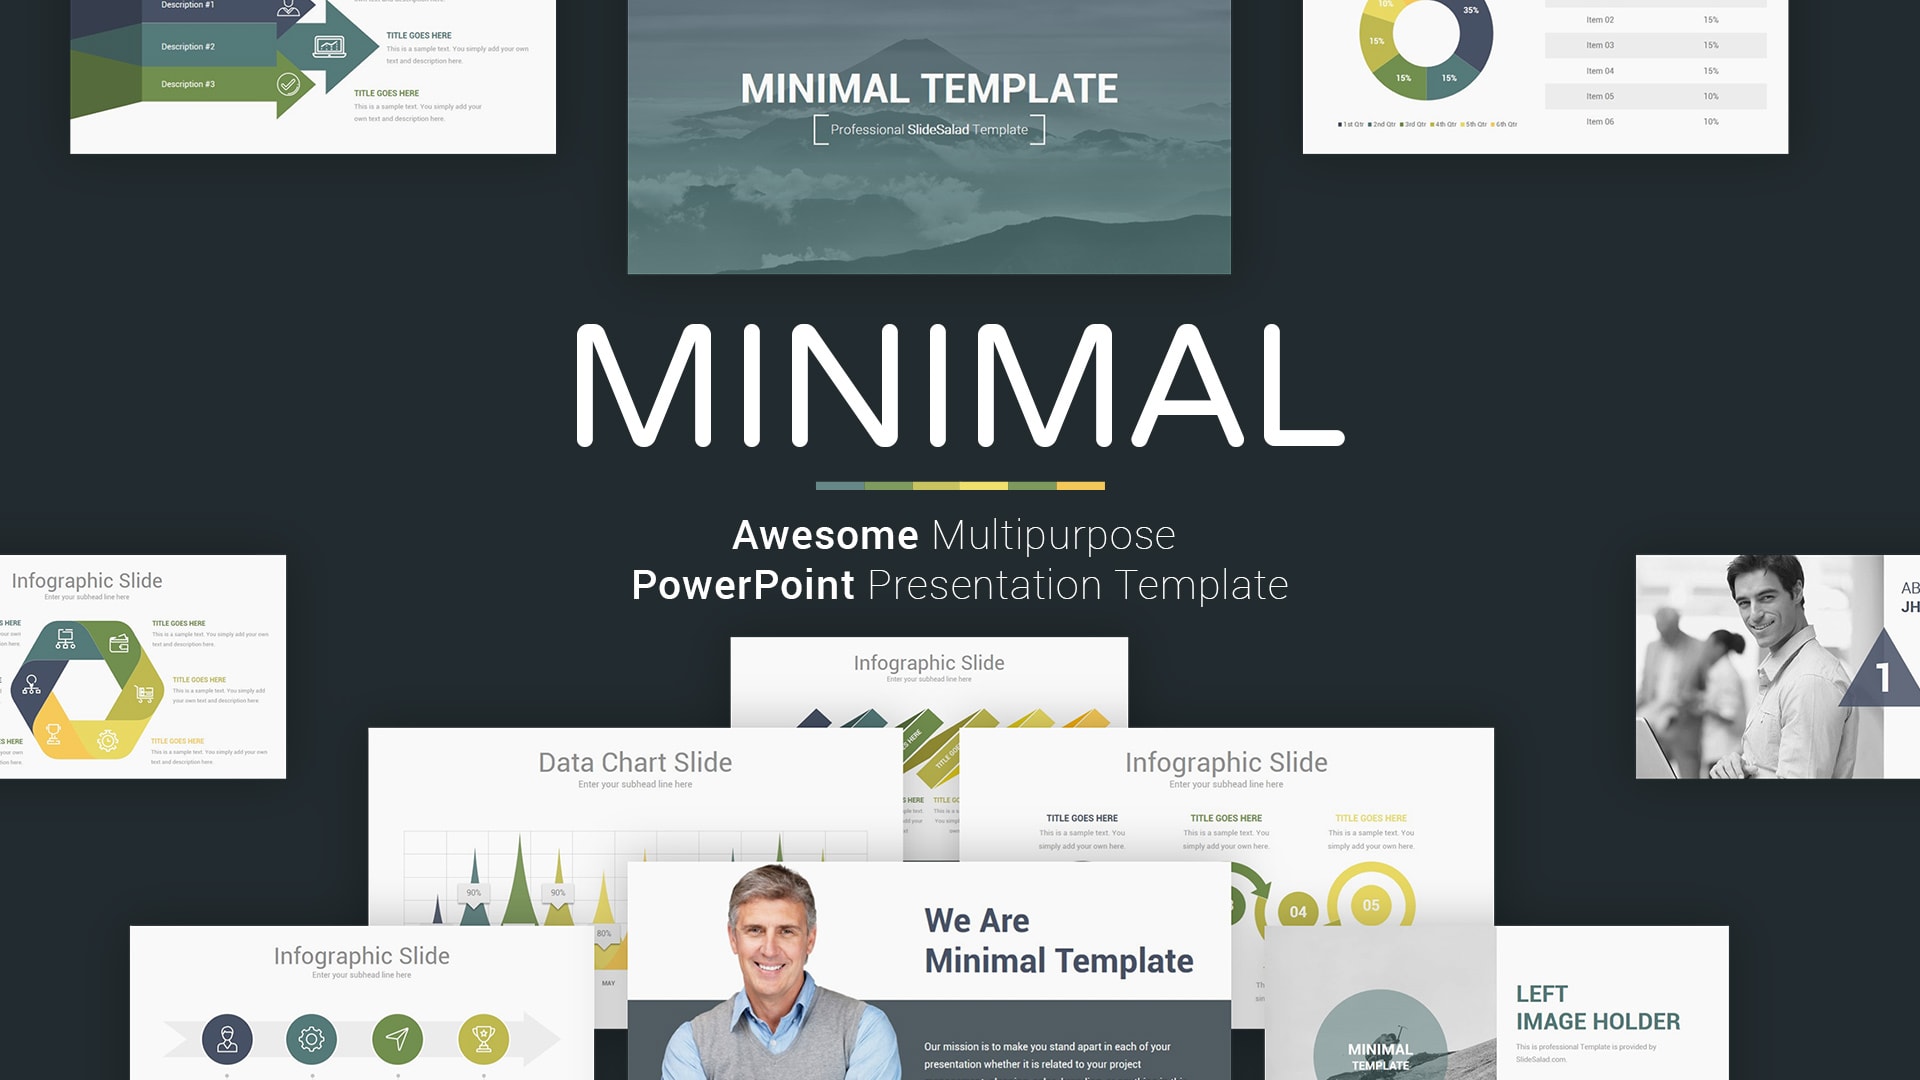 40+ Animated PowerPoint (PPT) Templates for Presentations, 2023 - SlideSalad